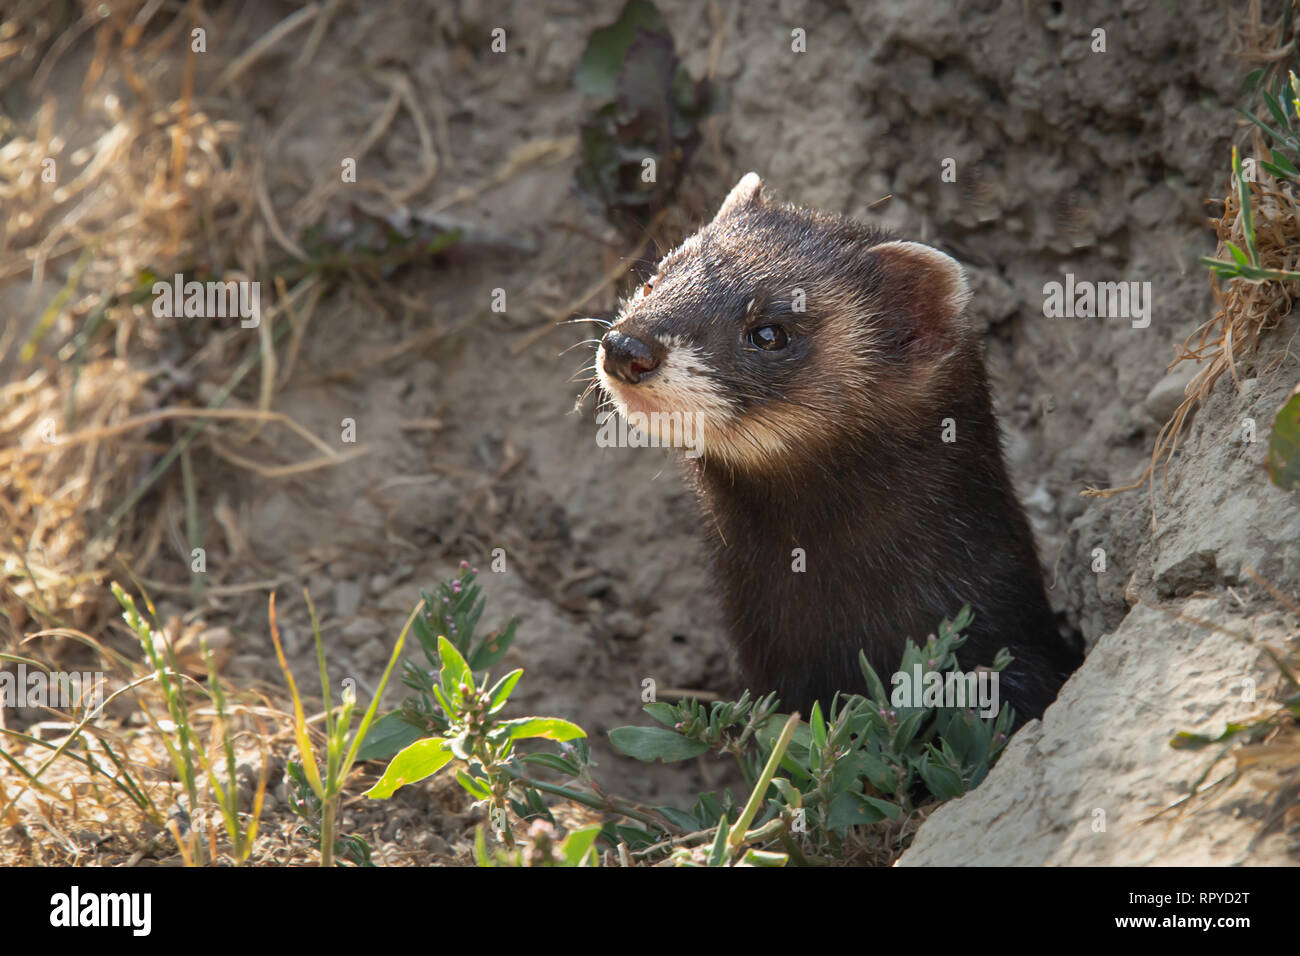 A close up of the head of a polecat as it emerges from it burrow in the bank Stock Photo